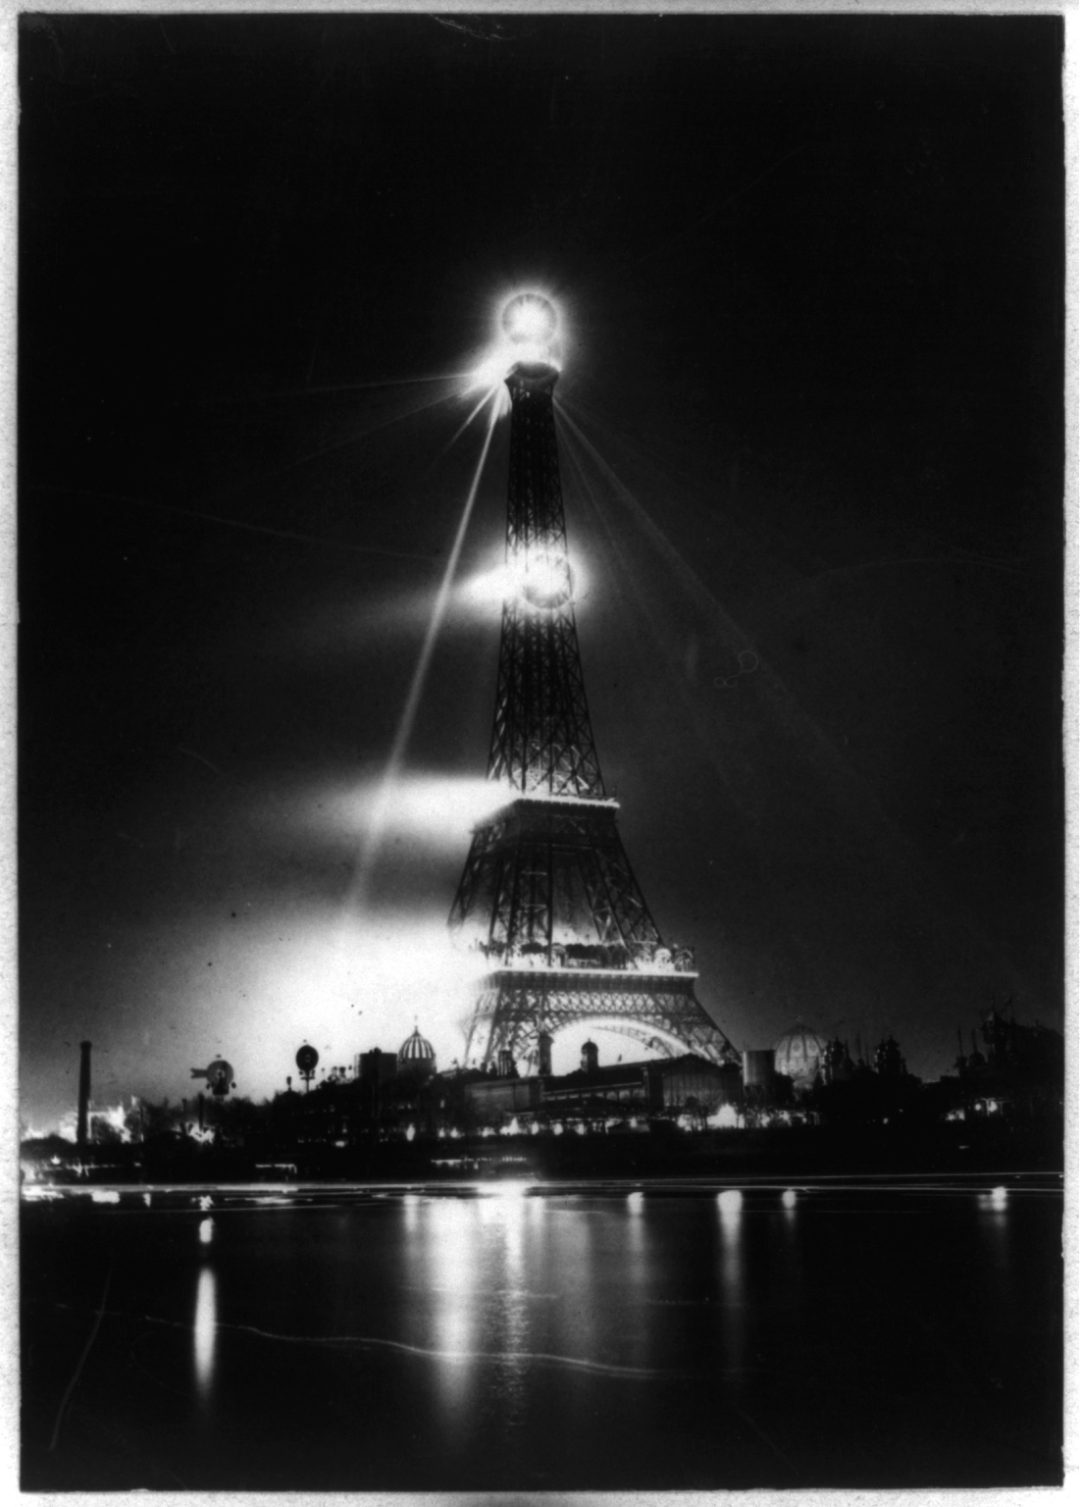 Eiffel Tower Aglow at Night – Library of Congress